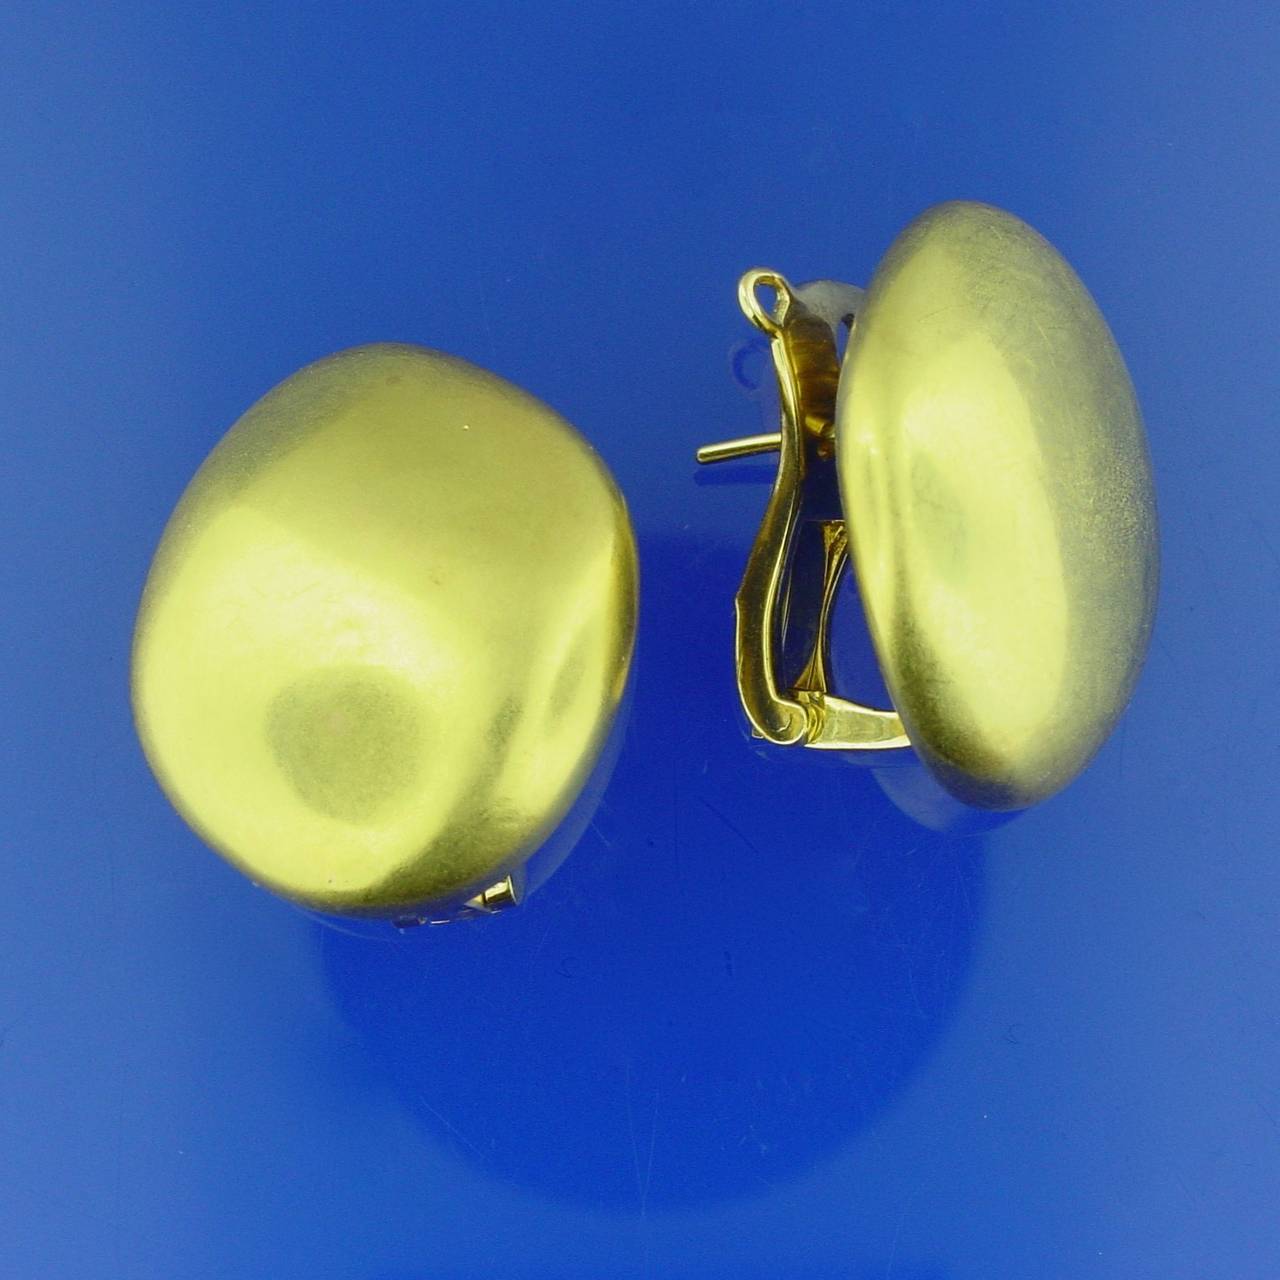 A Pair of 18 Karat Brushed Yellow Gold Pebble “les Galets” Earrings by James Taffin de Givenchy, signed Taffin. With maker's mark, numbered TF598 and inscribed “les Galets”. With original suede pouch.